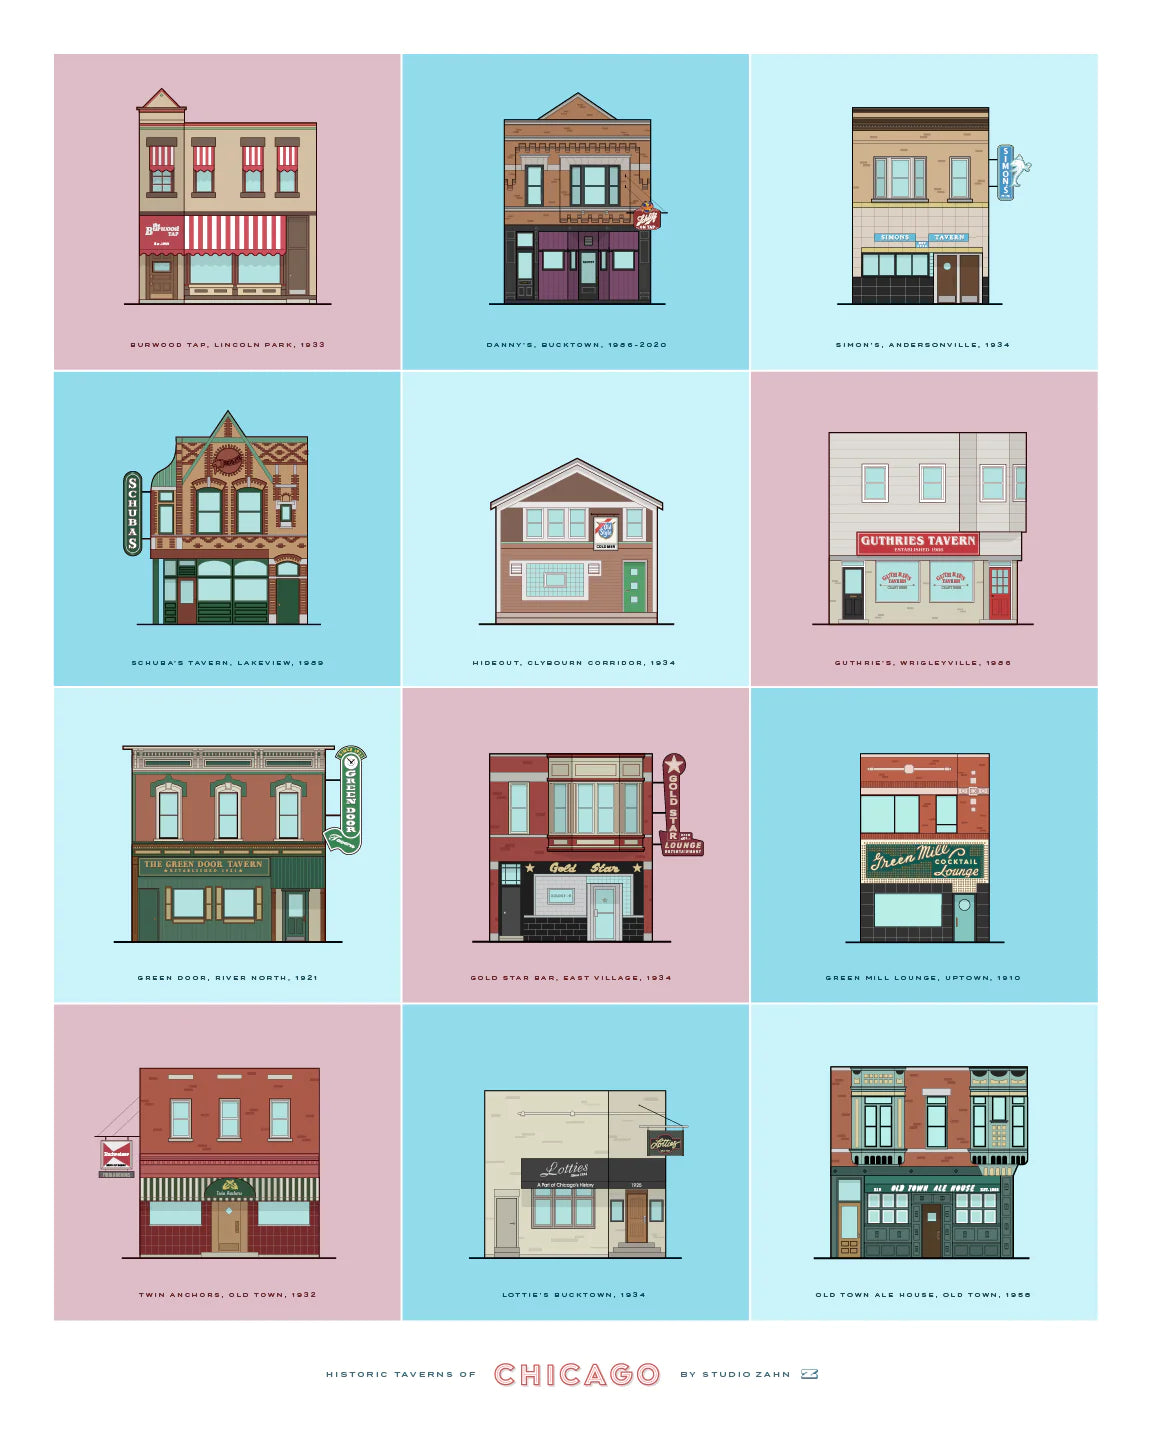 Taverns of Chicago Grid Background 16" x 20" Archival Print